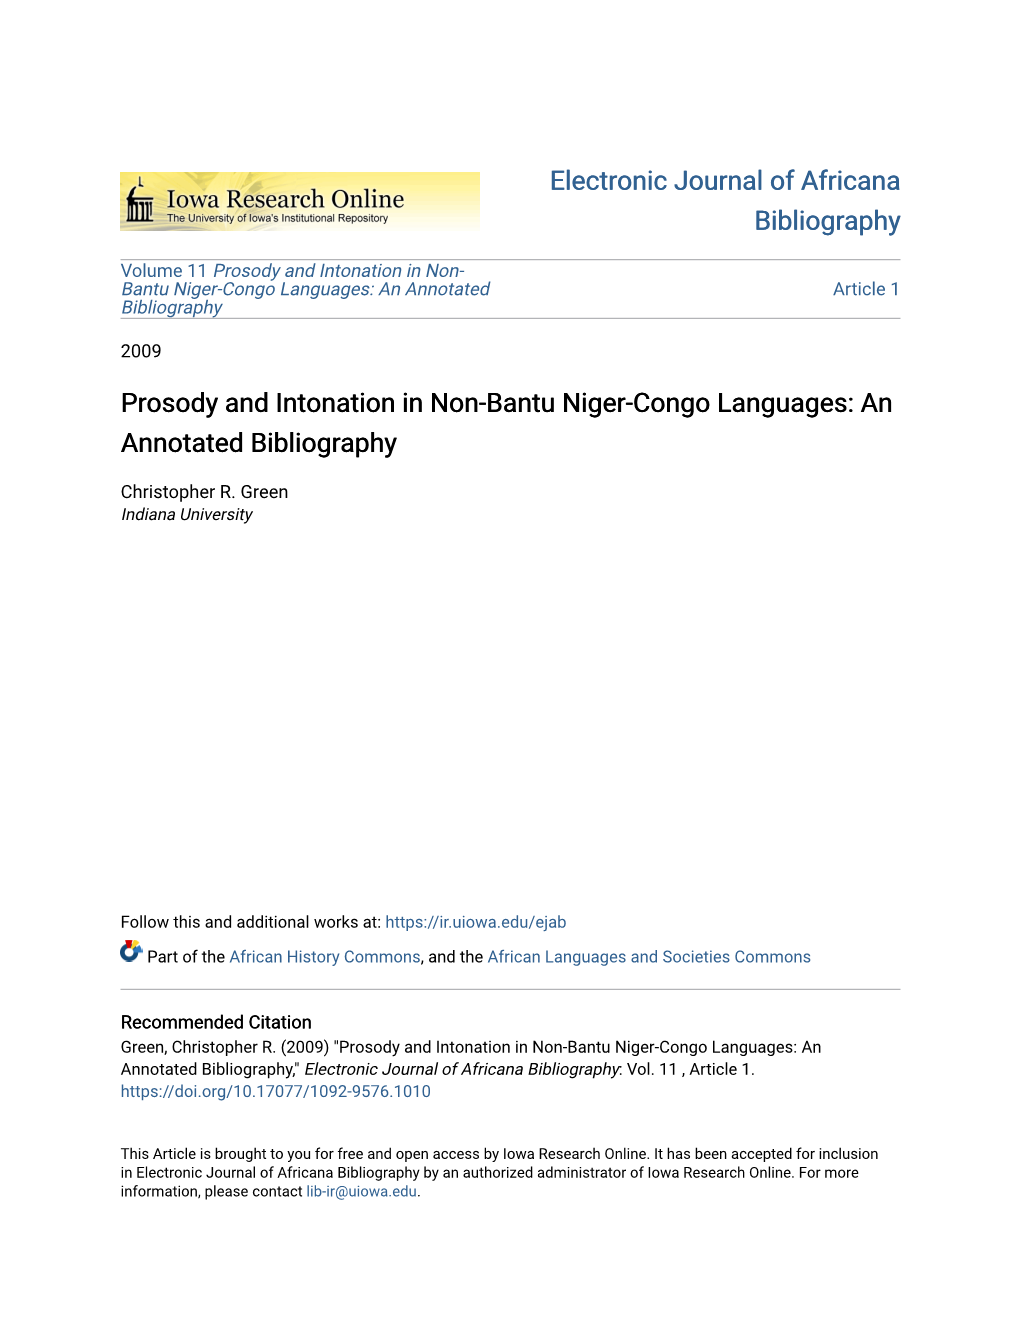 Prosody and Intonation in Non-Bantu Niger-Congo Languages: an Annotated Bibliography